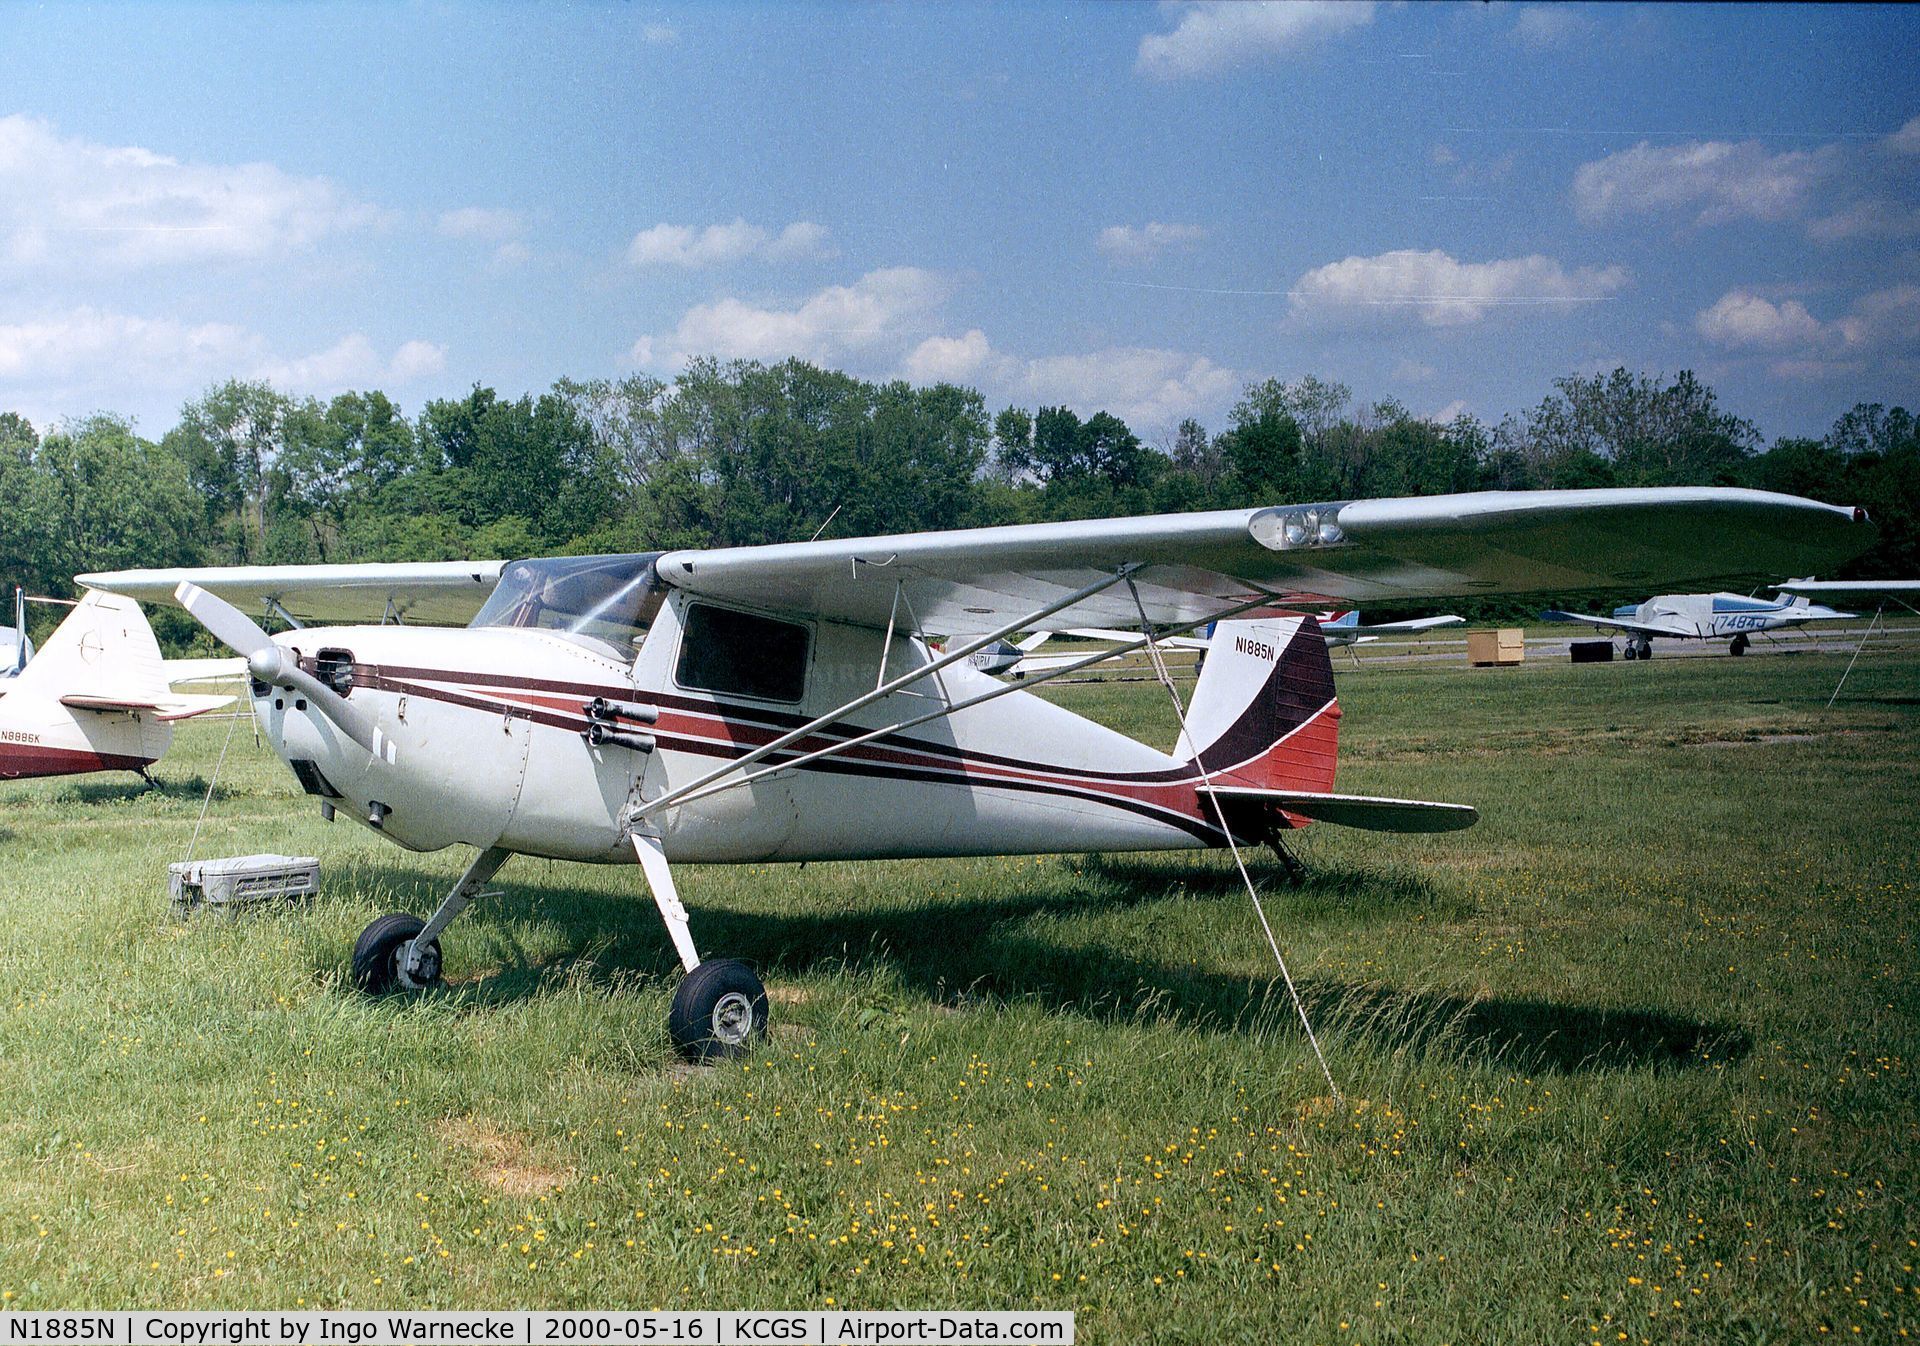 N1885N, 1946 Cessna 120 C/N 12129, Cessna 120 at College Park MD airfield